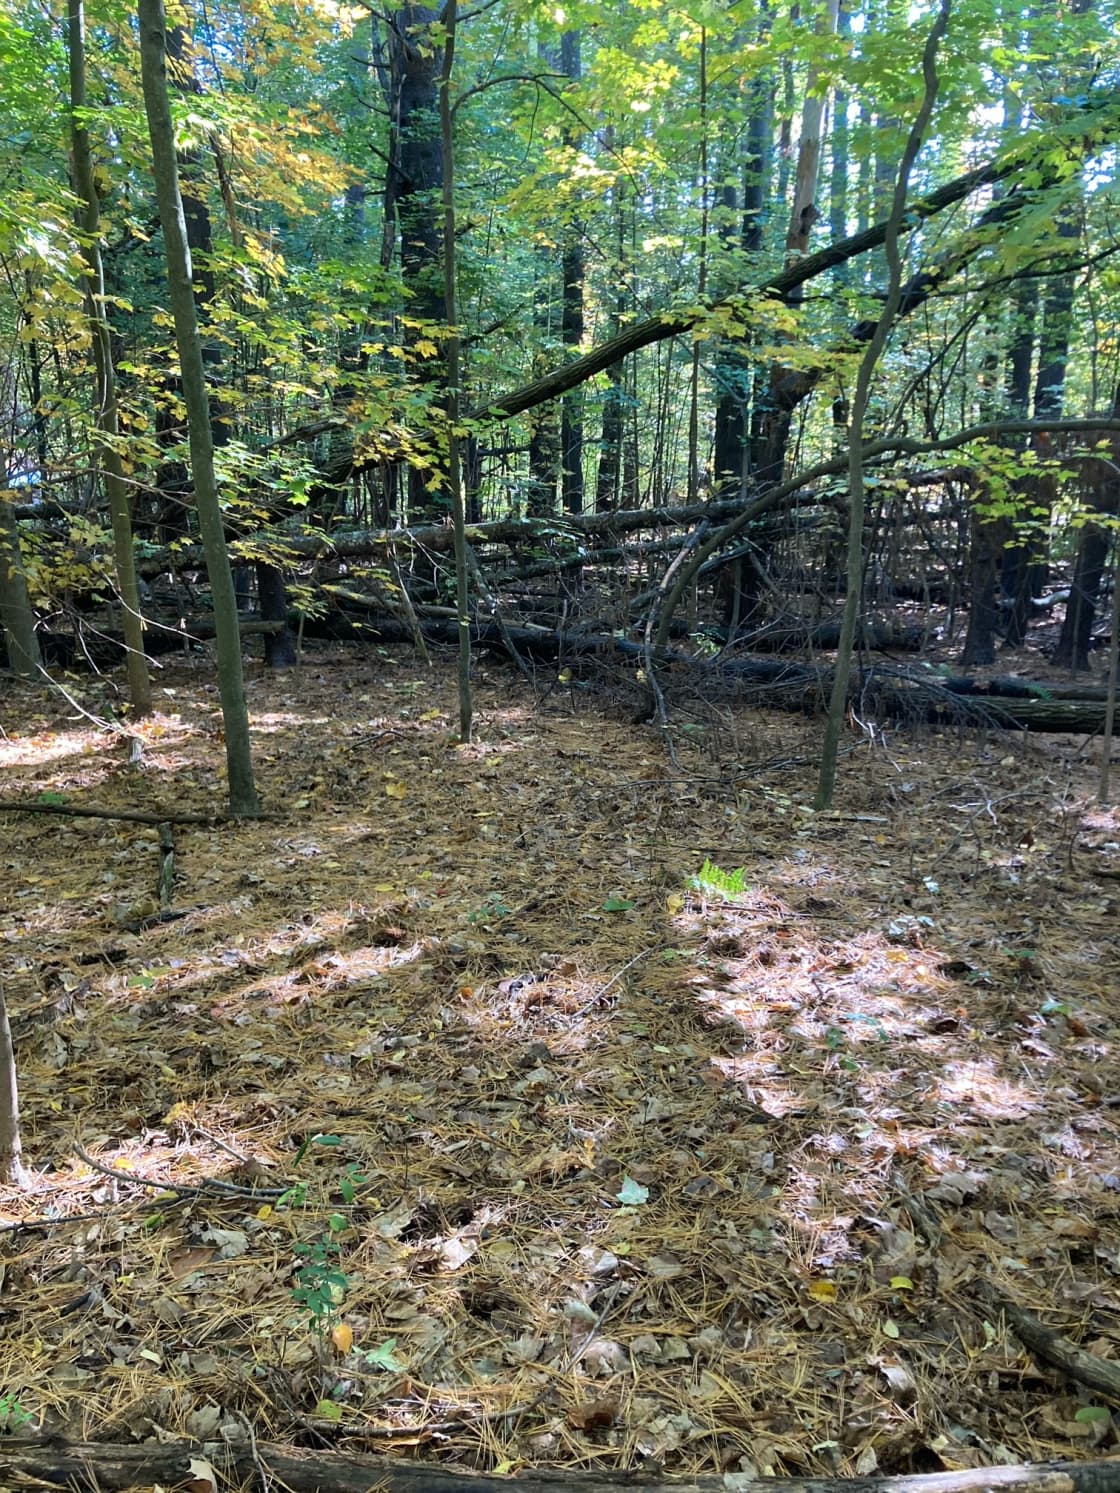 There are several flat spots deeper in the woods that would be great for those seeking more seclusion. 